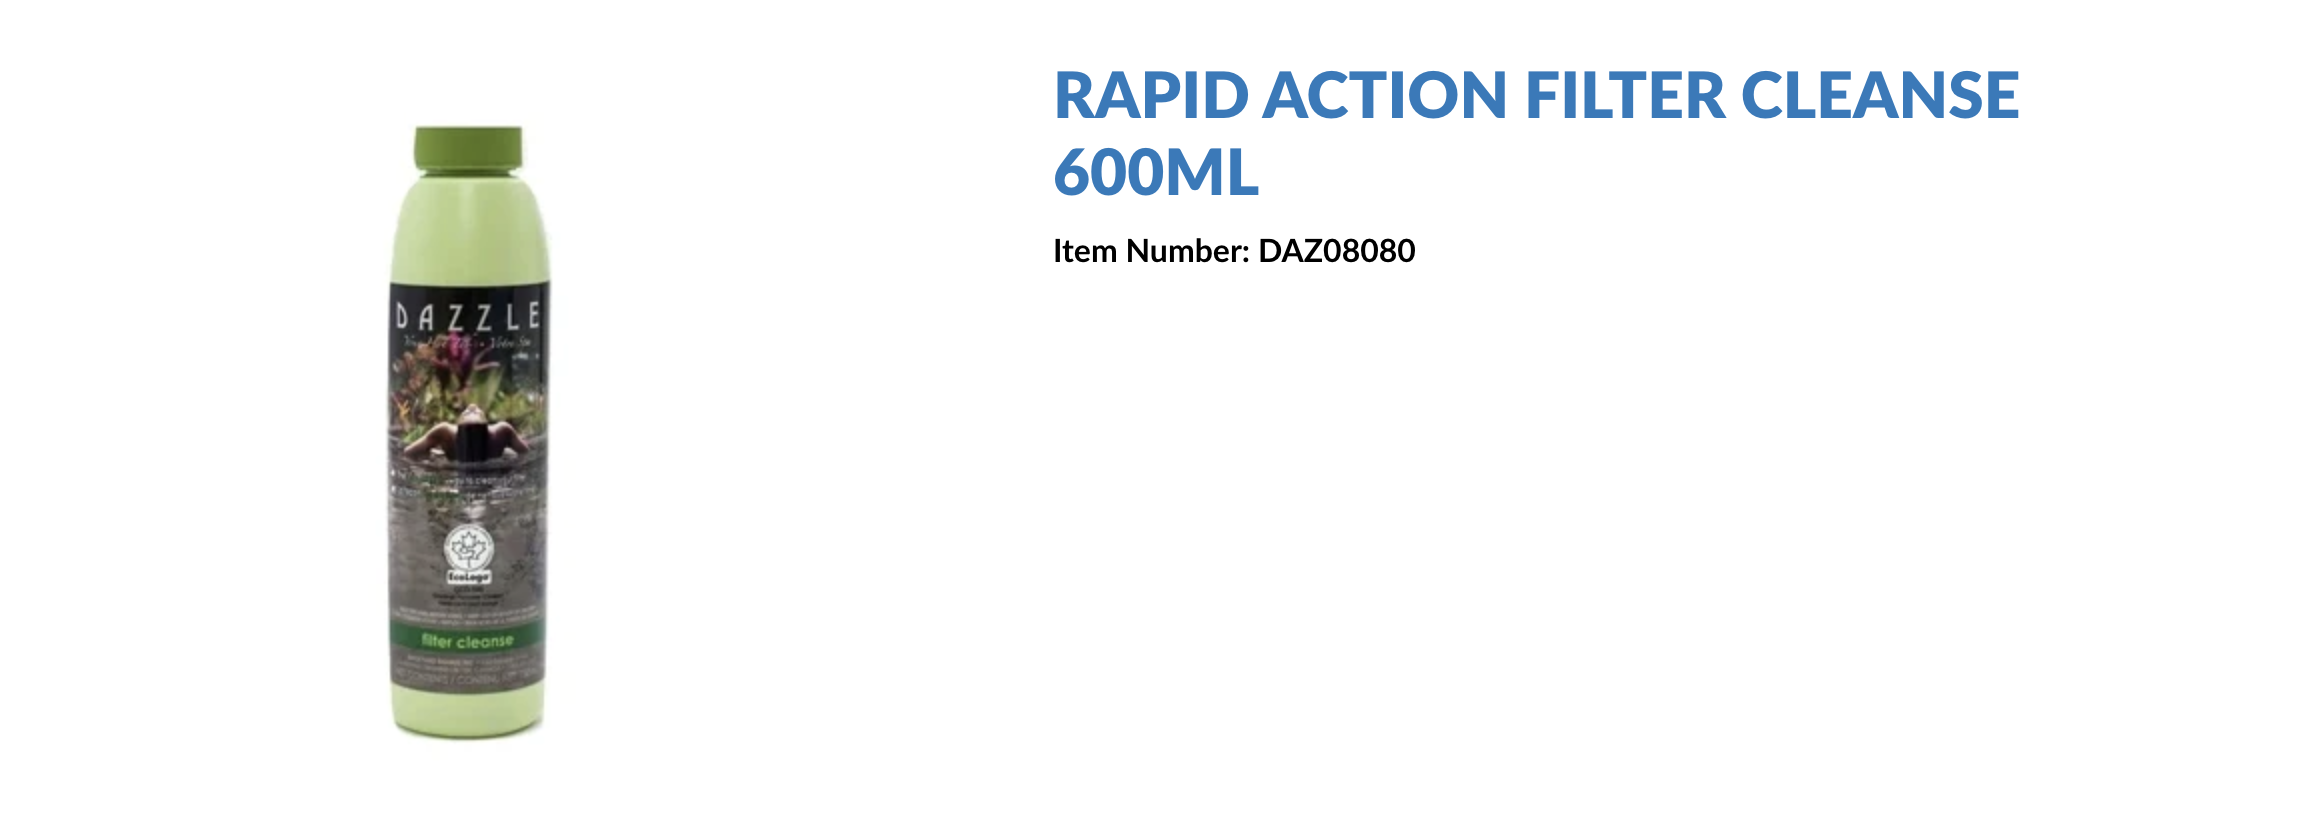 Rapid Action Filter Cleanse